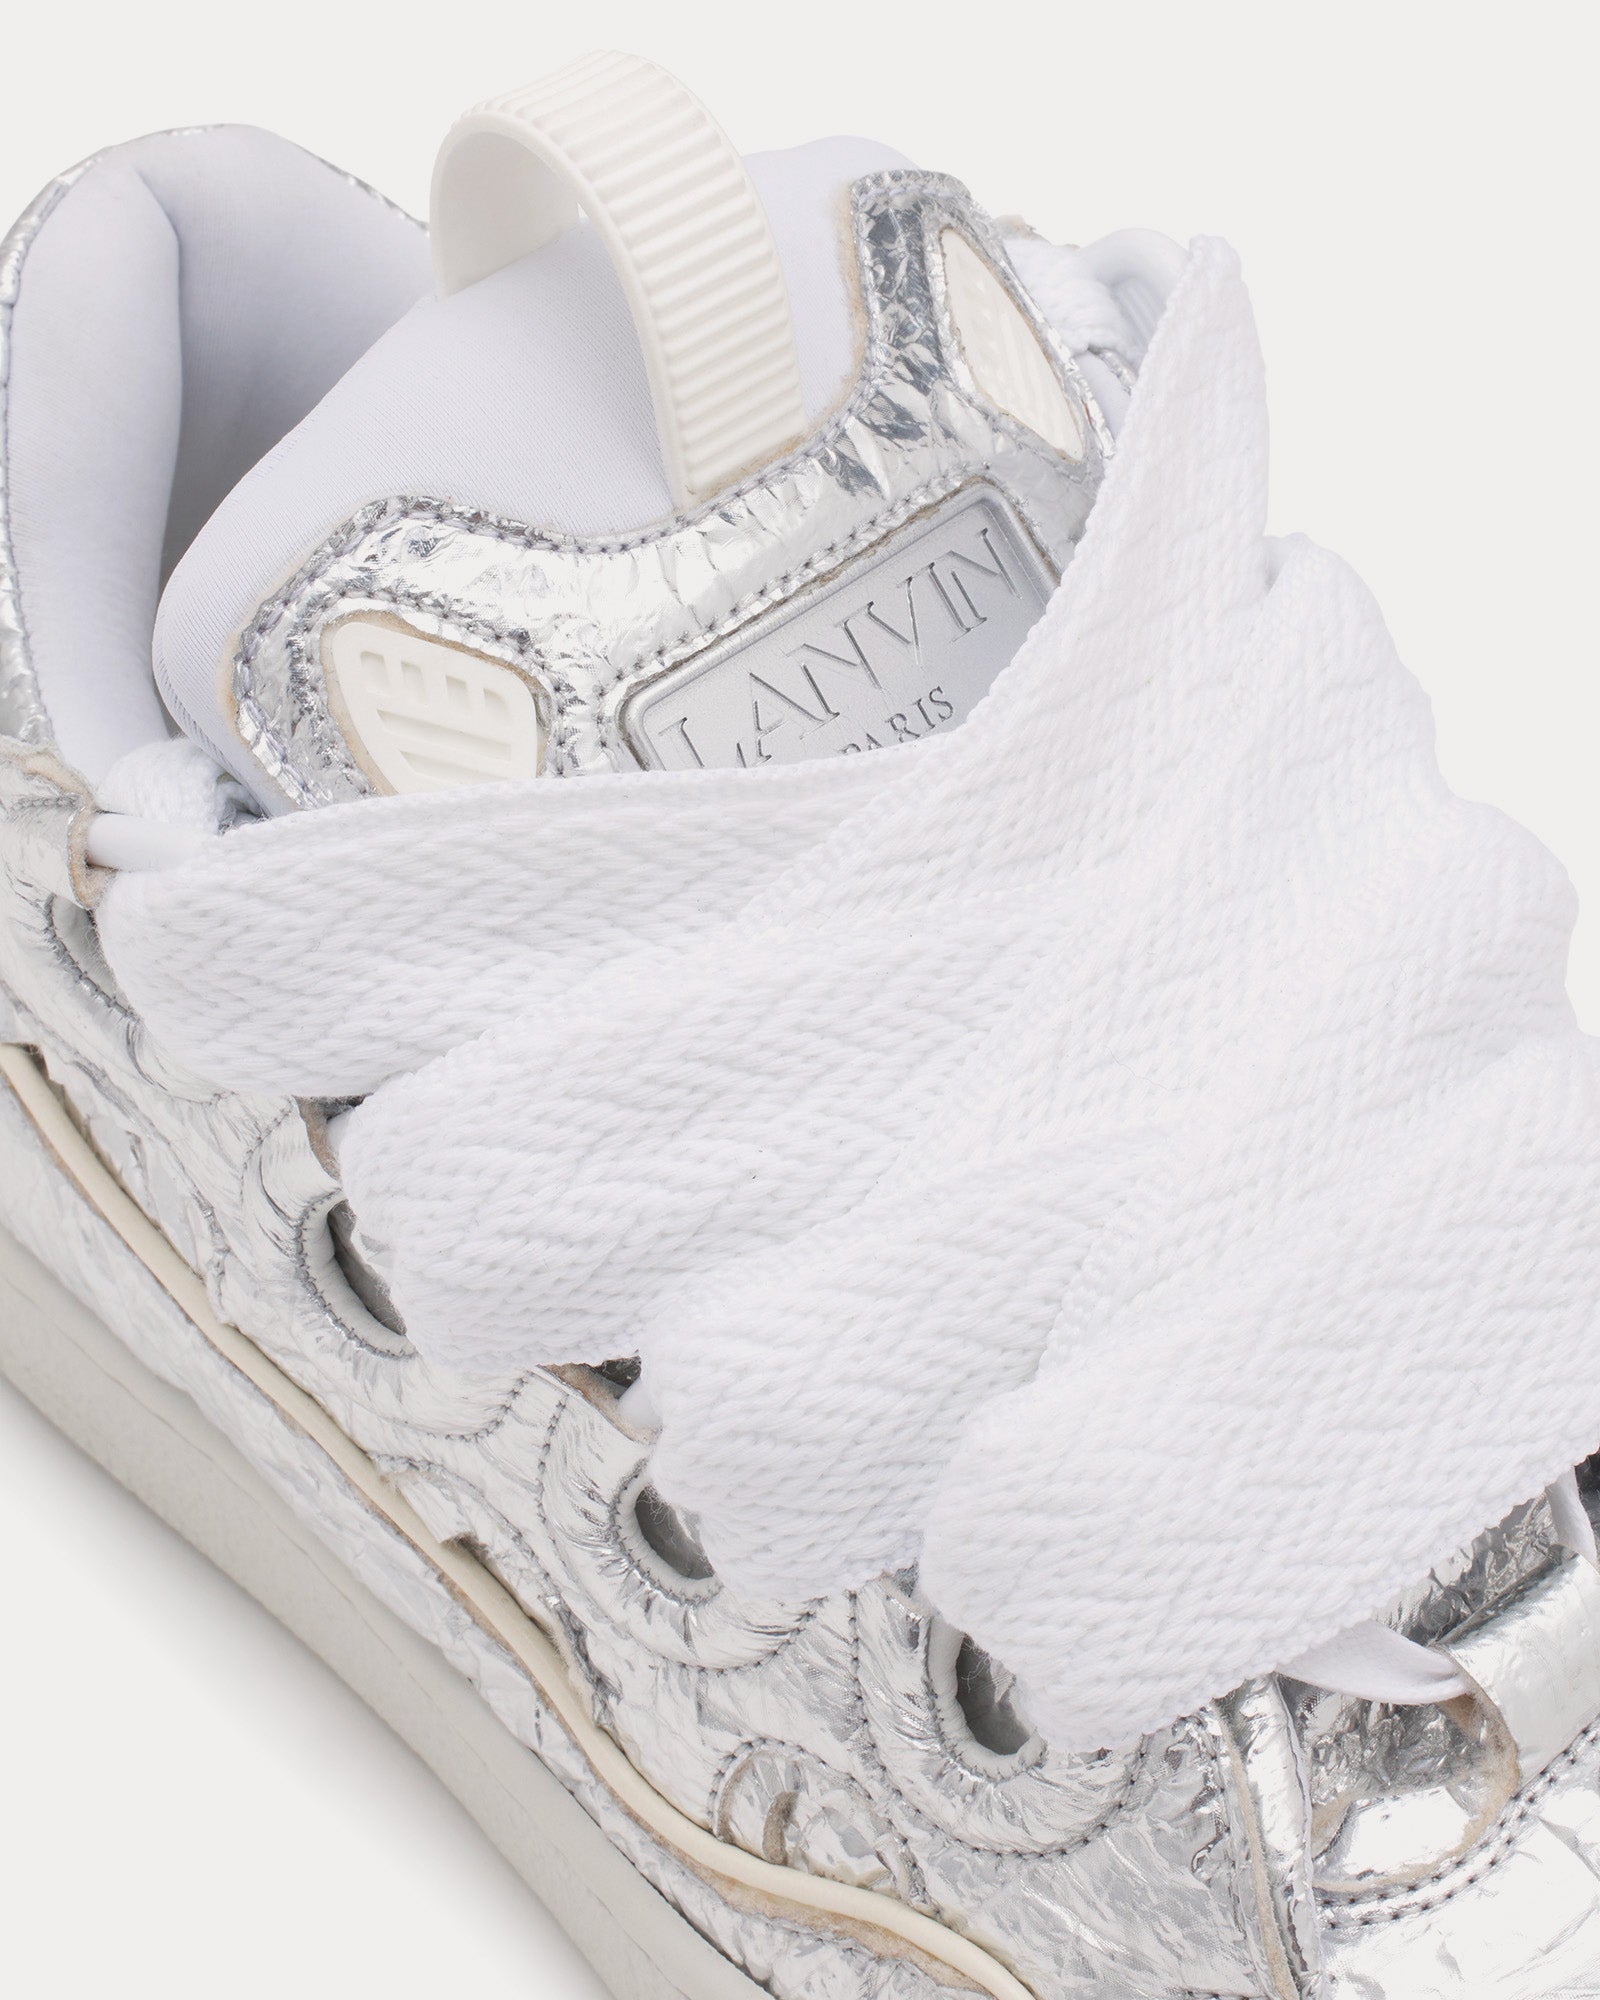 Lanvin - Curb Crinkled Metallic Leather Silver Low Top Sneakers